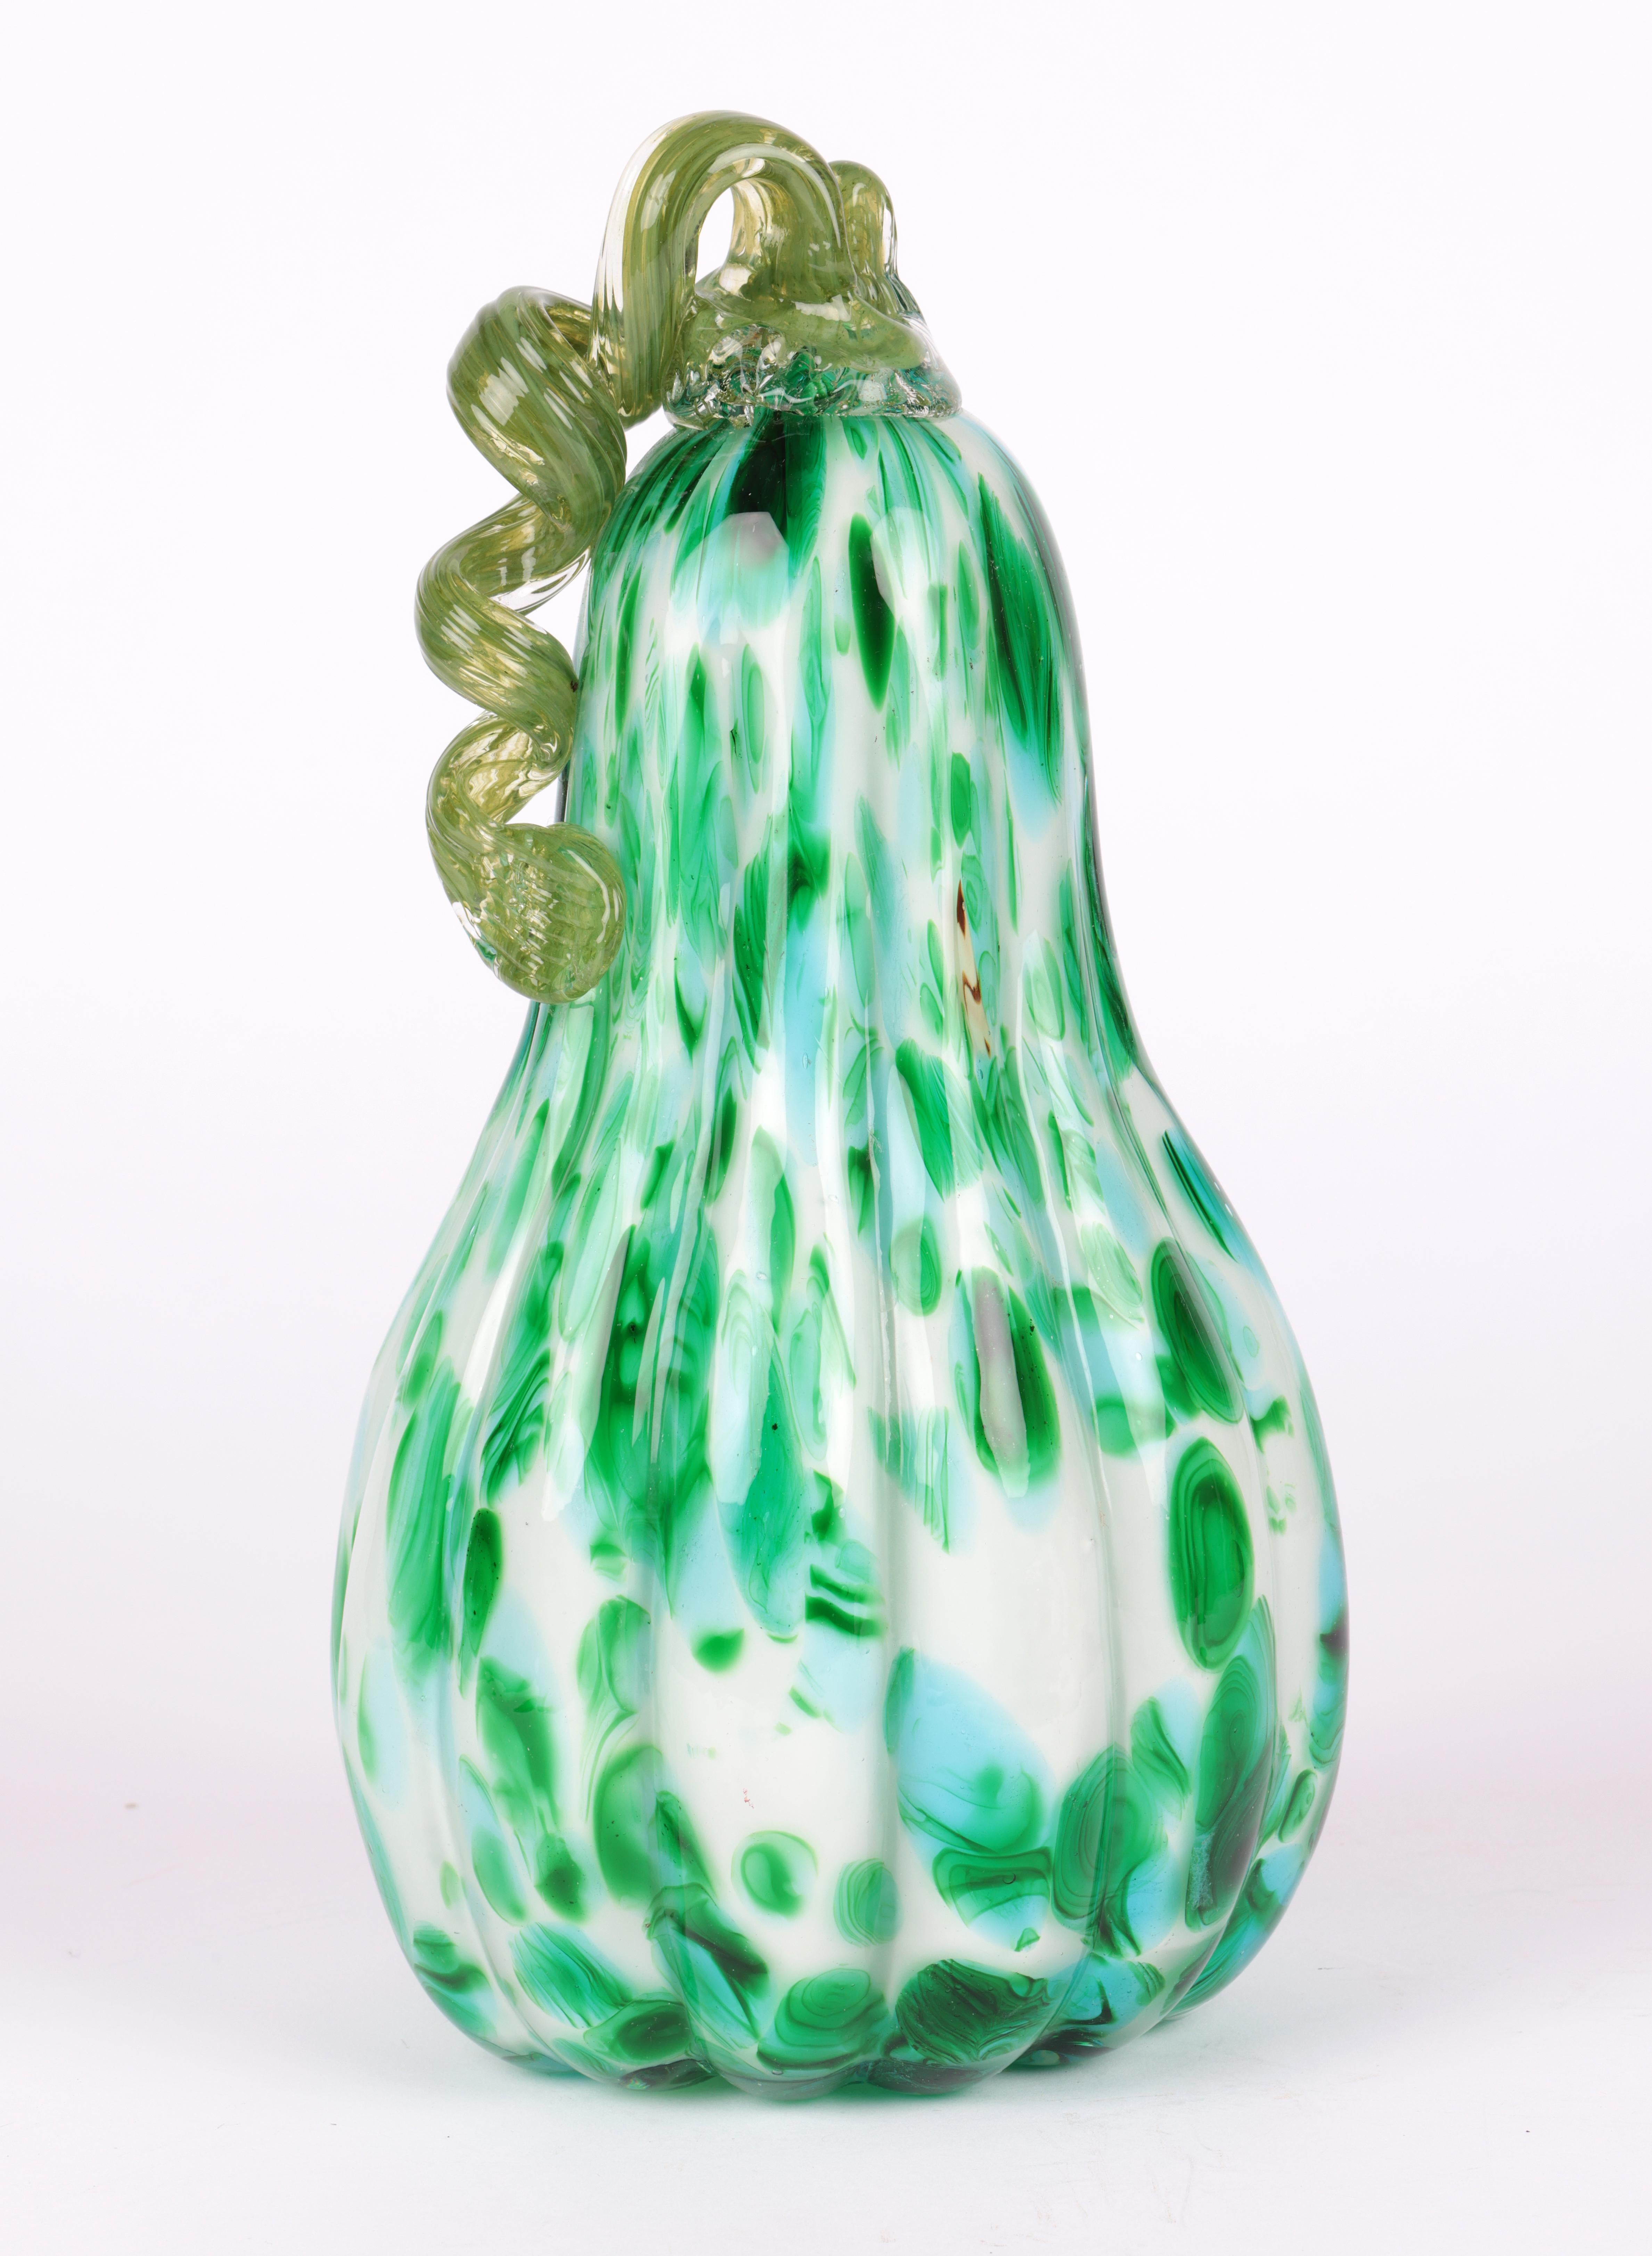 A stylish Italian Murano large green art glass gourd dating from the latter 20th century. The hand-blown gourd is of tall shape with a wide rounded base and ribbed body narrowing to the top and applied with a trailing green glass stem attached with